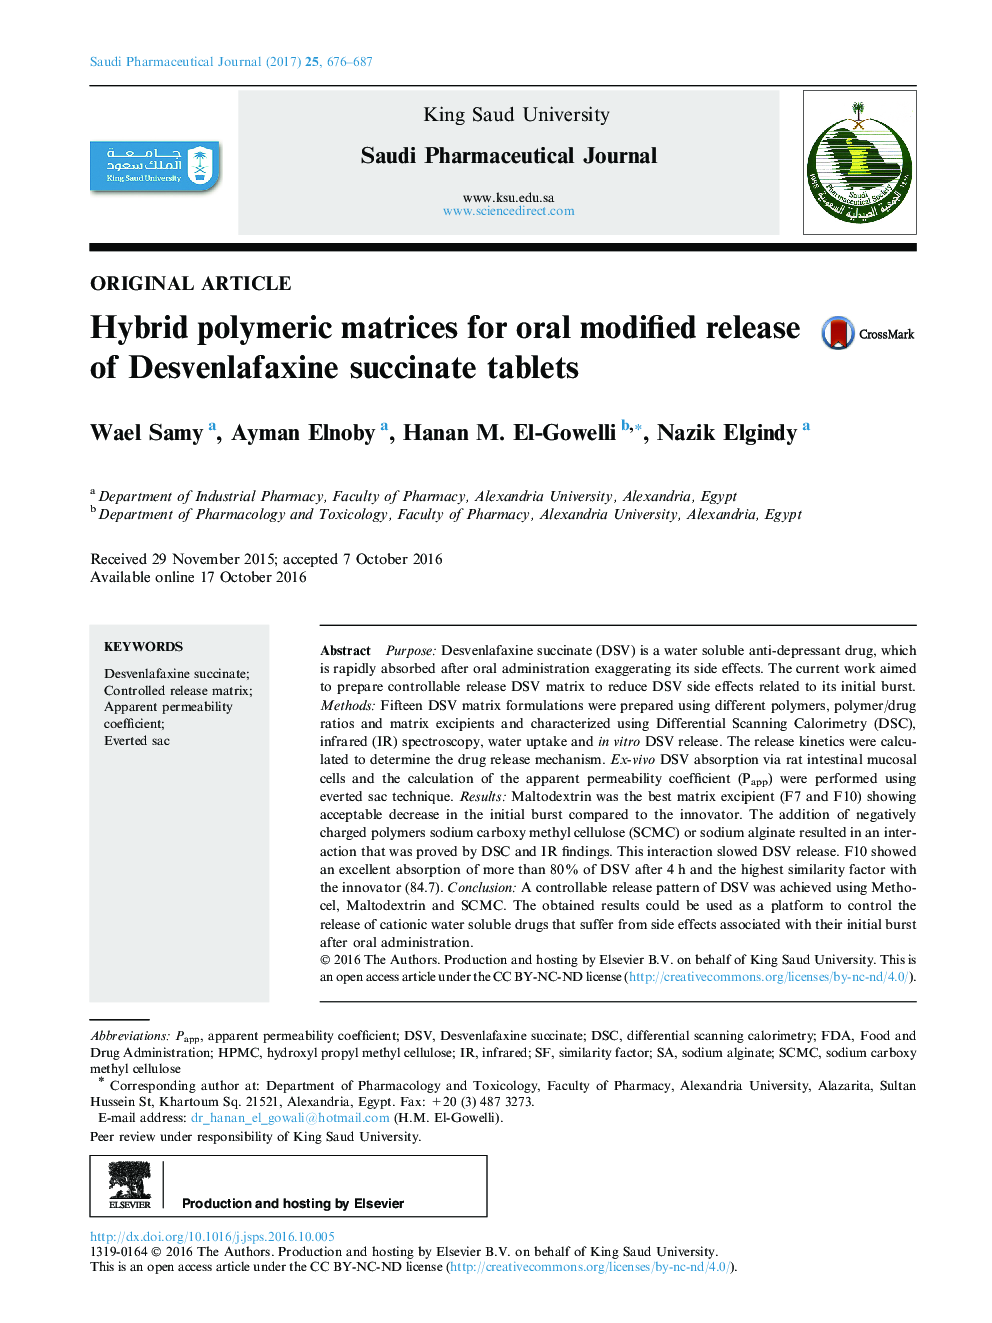 Hybrid polymeric matrices for oral modified release of Desvenlafaxine succinate tablets